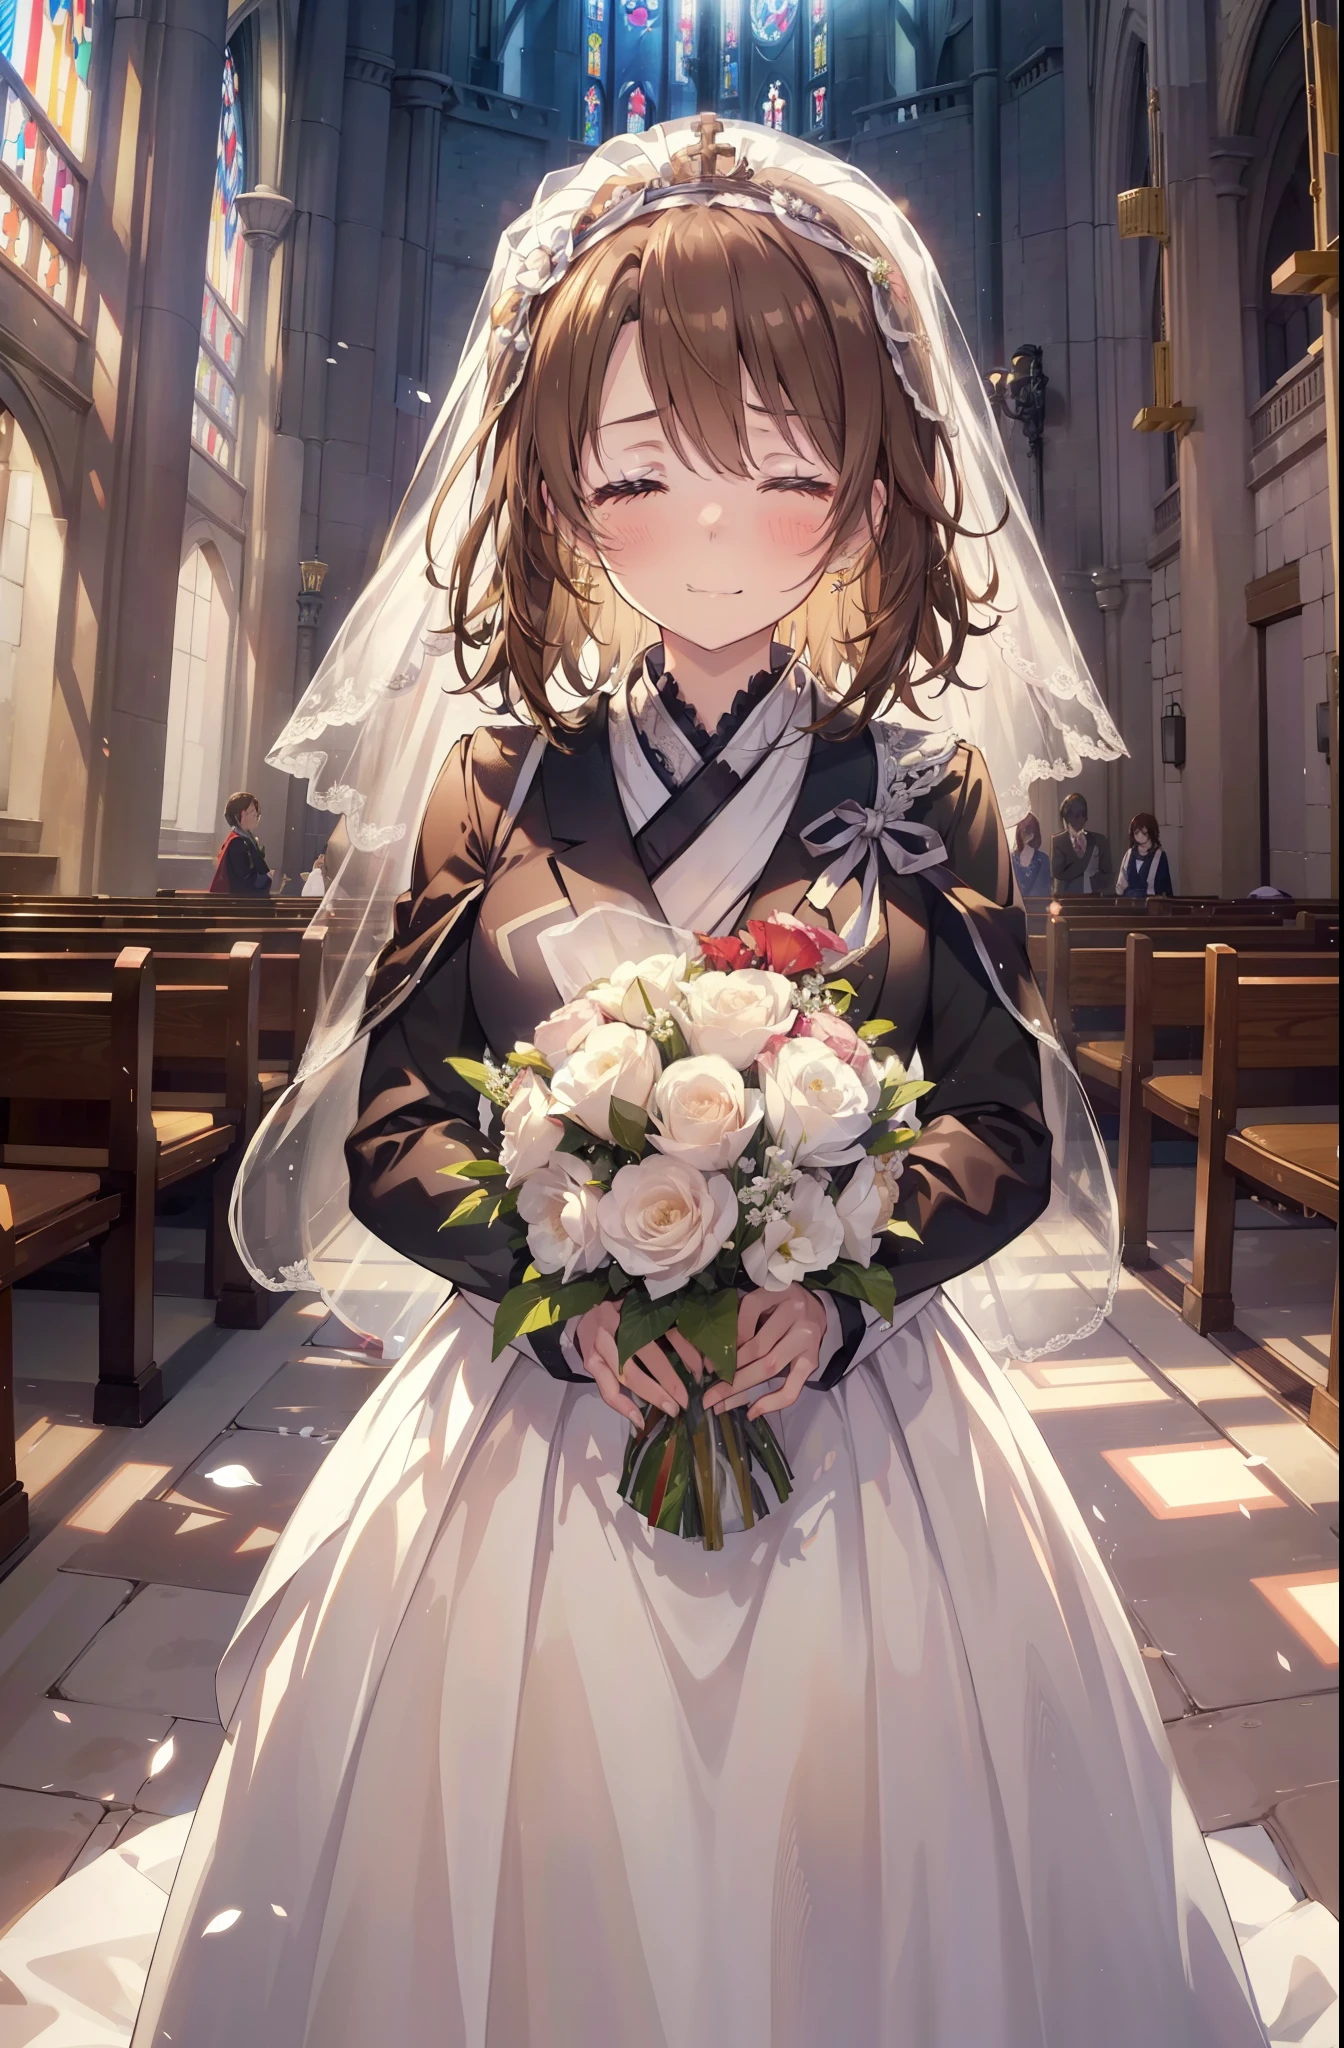 irohaisshiki, iroha isshiki, long hair, brown hair,  open your mouth,smile,happy atmosphere,Please close your eyes and cry,tears run down her face,tears of joy,blush,smile,large pale stained glass,Light of the sun,chapel,marriage,church,Wedding dress,veil,Wedding Skirts,bouquet,bouquetトス,Holding a big bouquet in both hands,happy atmosphere,Hanabubuki,marriage式,　　　　　　　　　　　　　　　　　　　　break indoors, chapel, church,
break (masterpiece:1.2), highest quality, High resolution, unity 8k wallpaper, (shape:0.8), (highly detailed face, perfect lighting, Very detailed CG, (perfect hands, perfect anatomy),